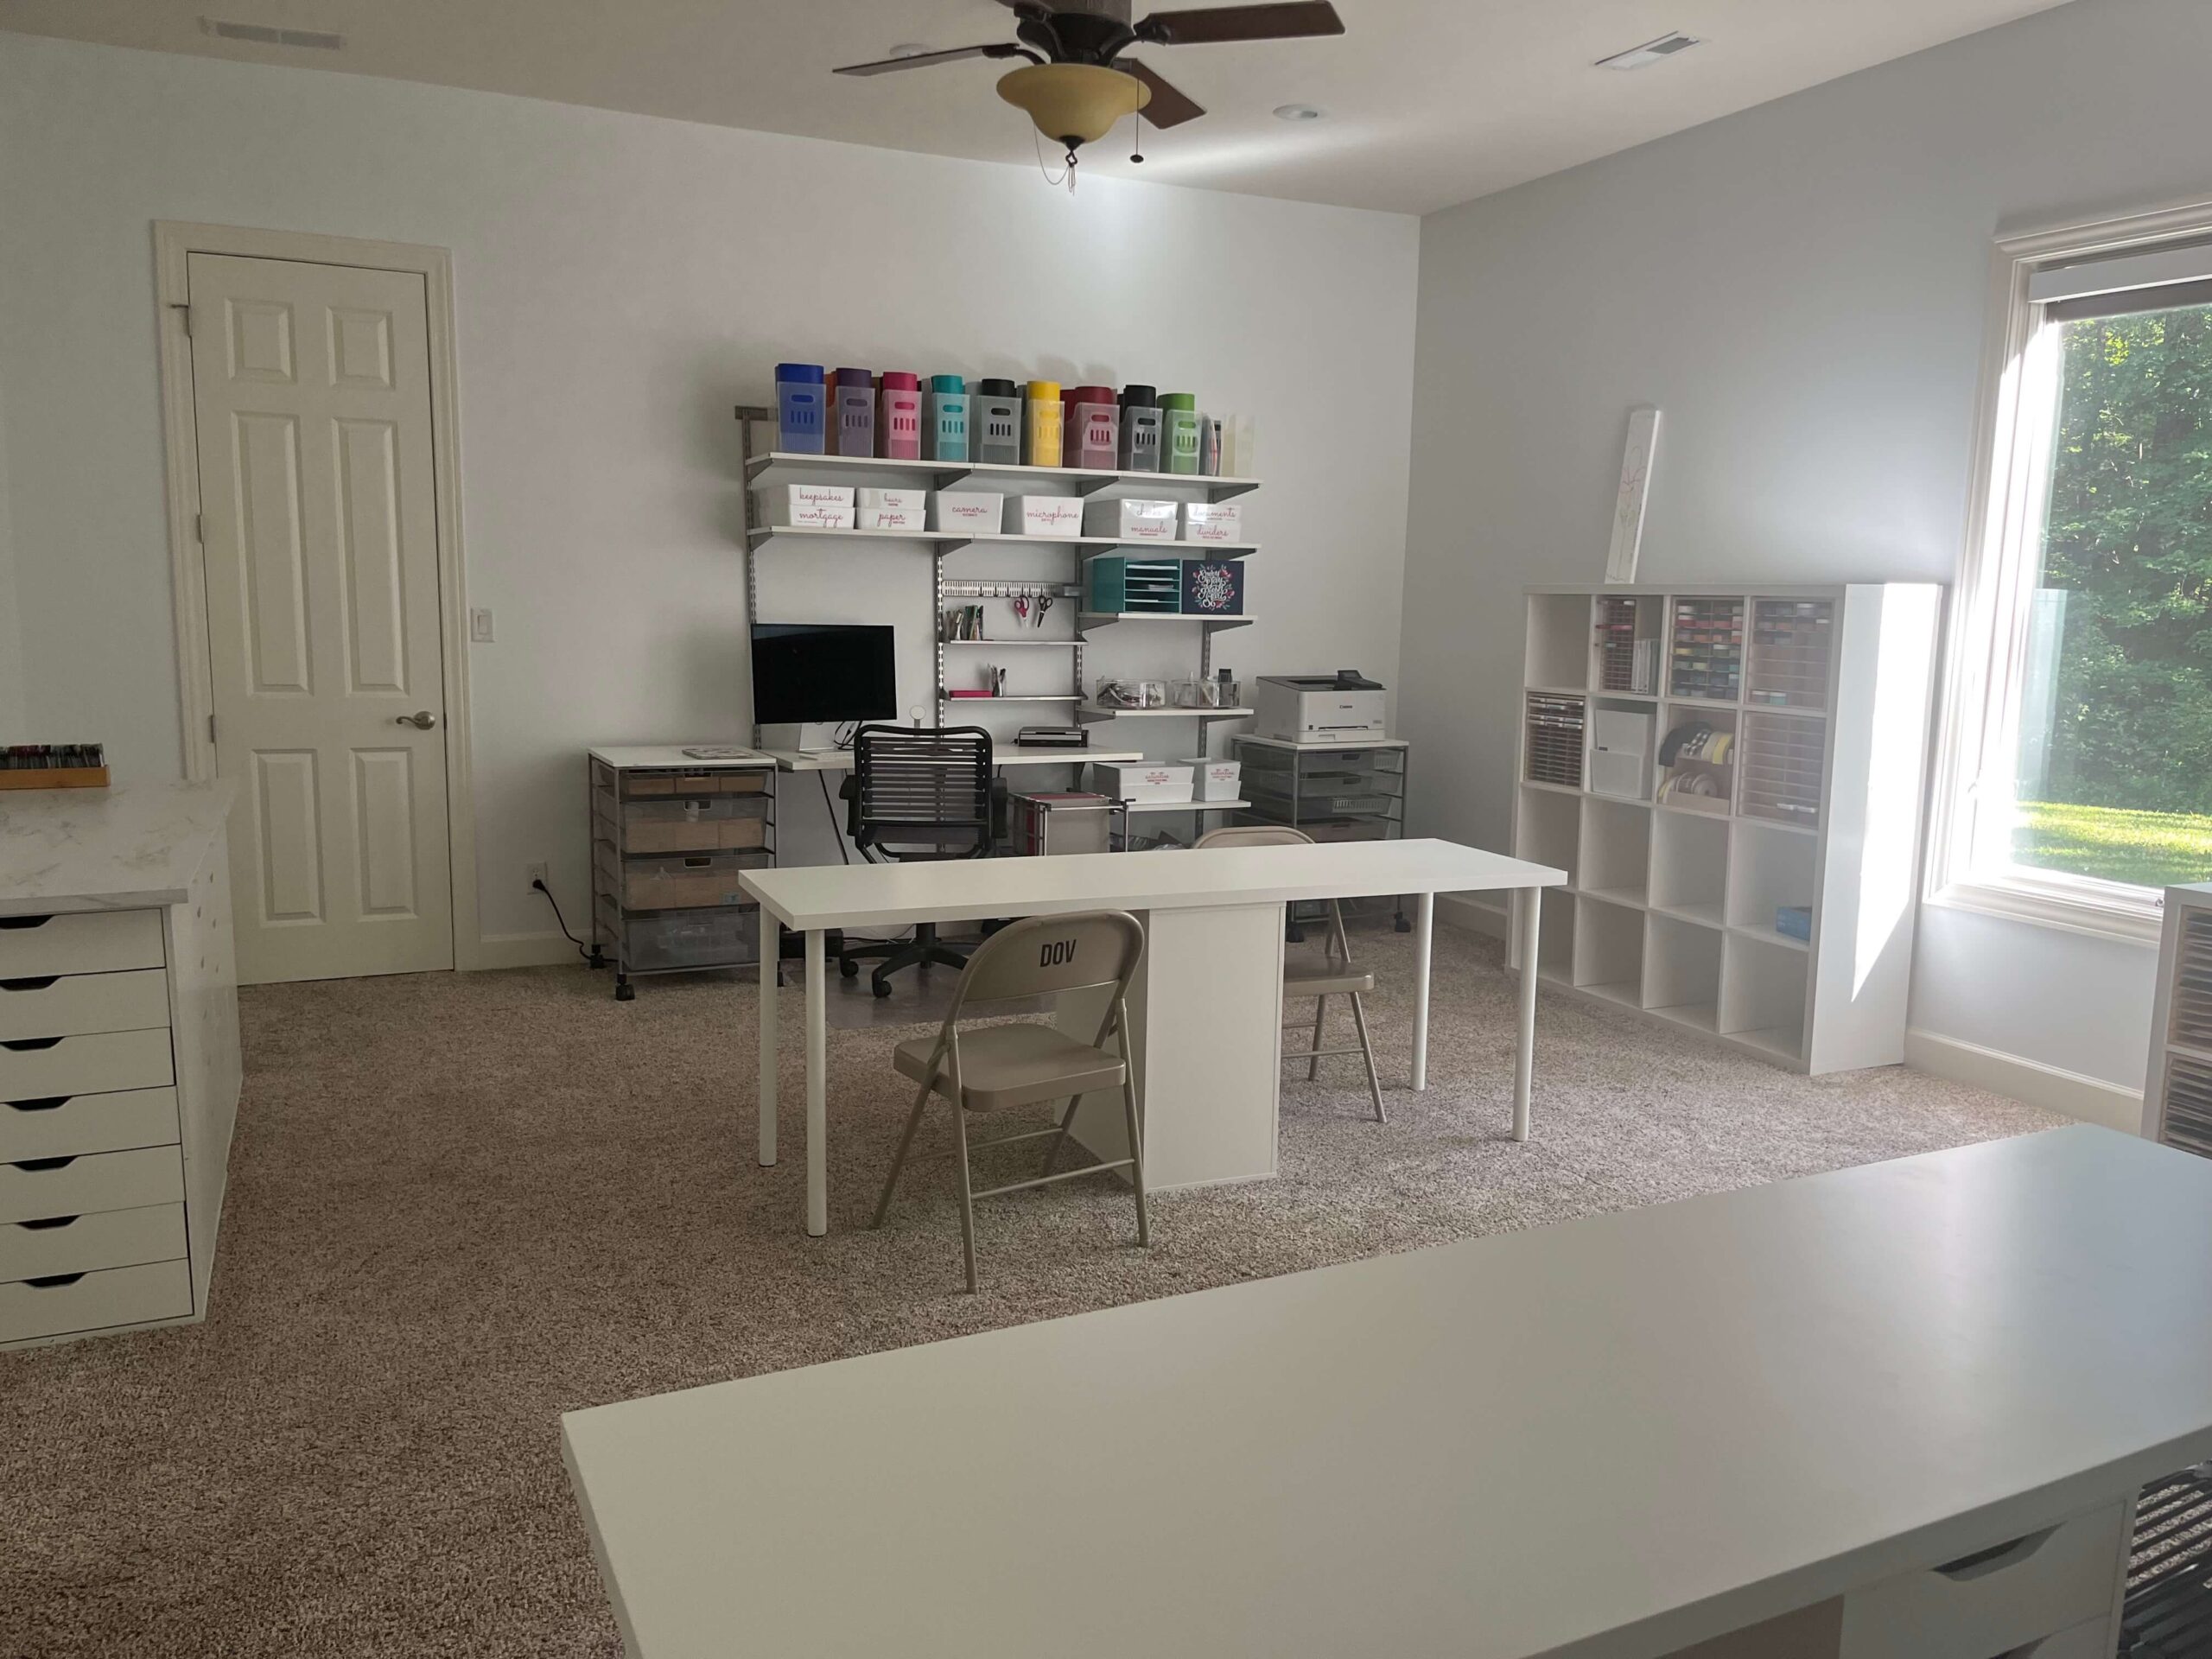 Cricut craft room and desk setup with all products from ikea